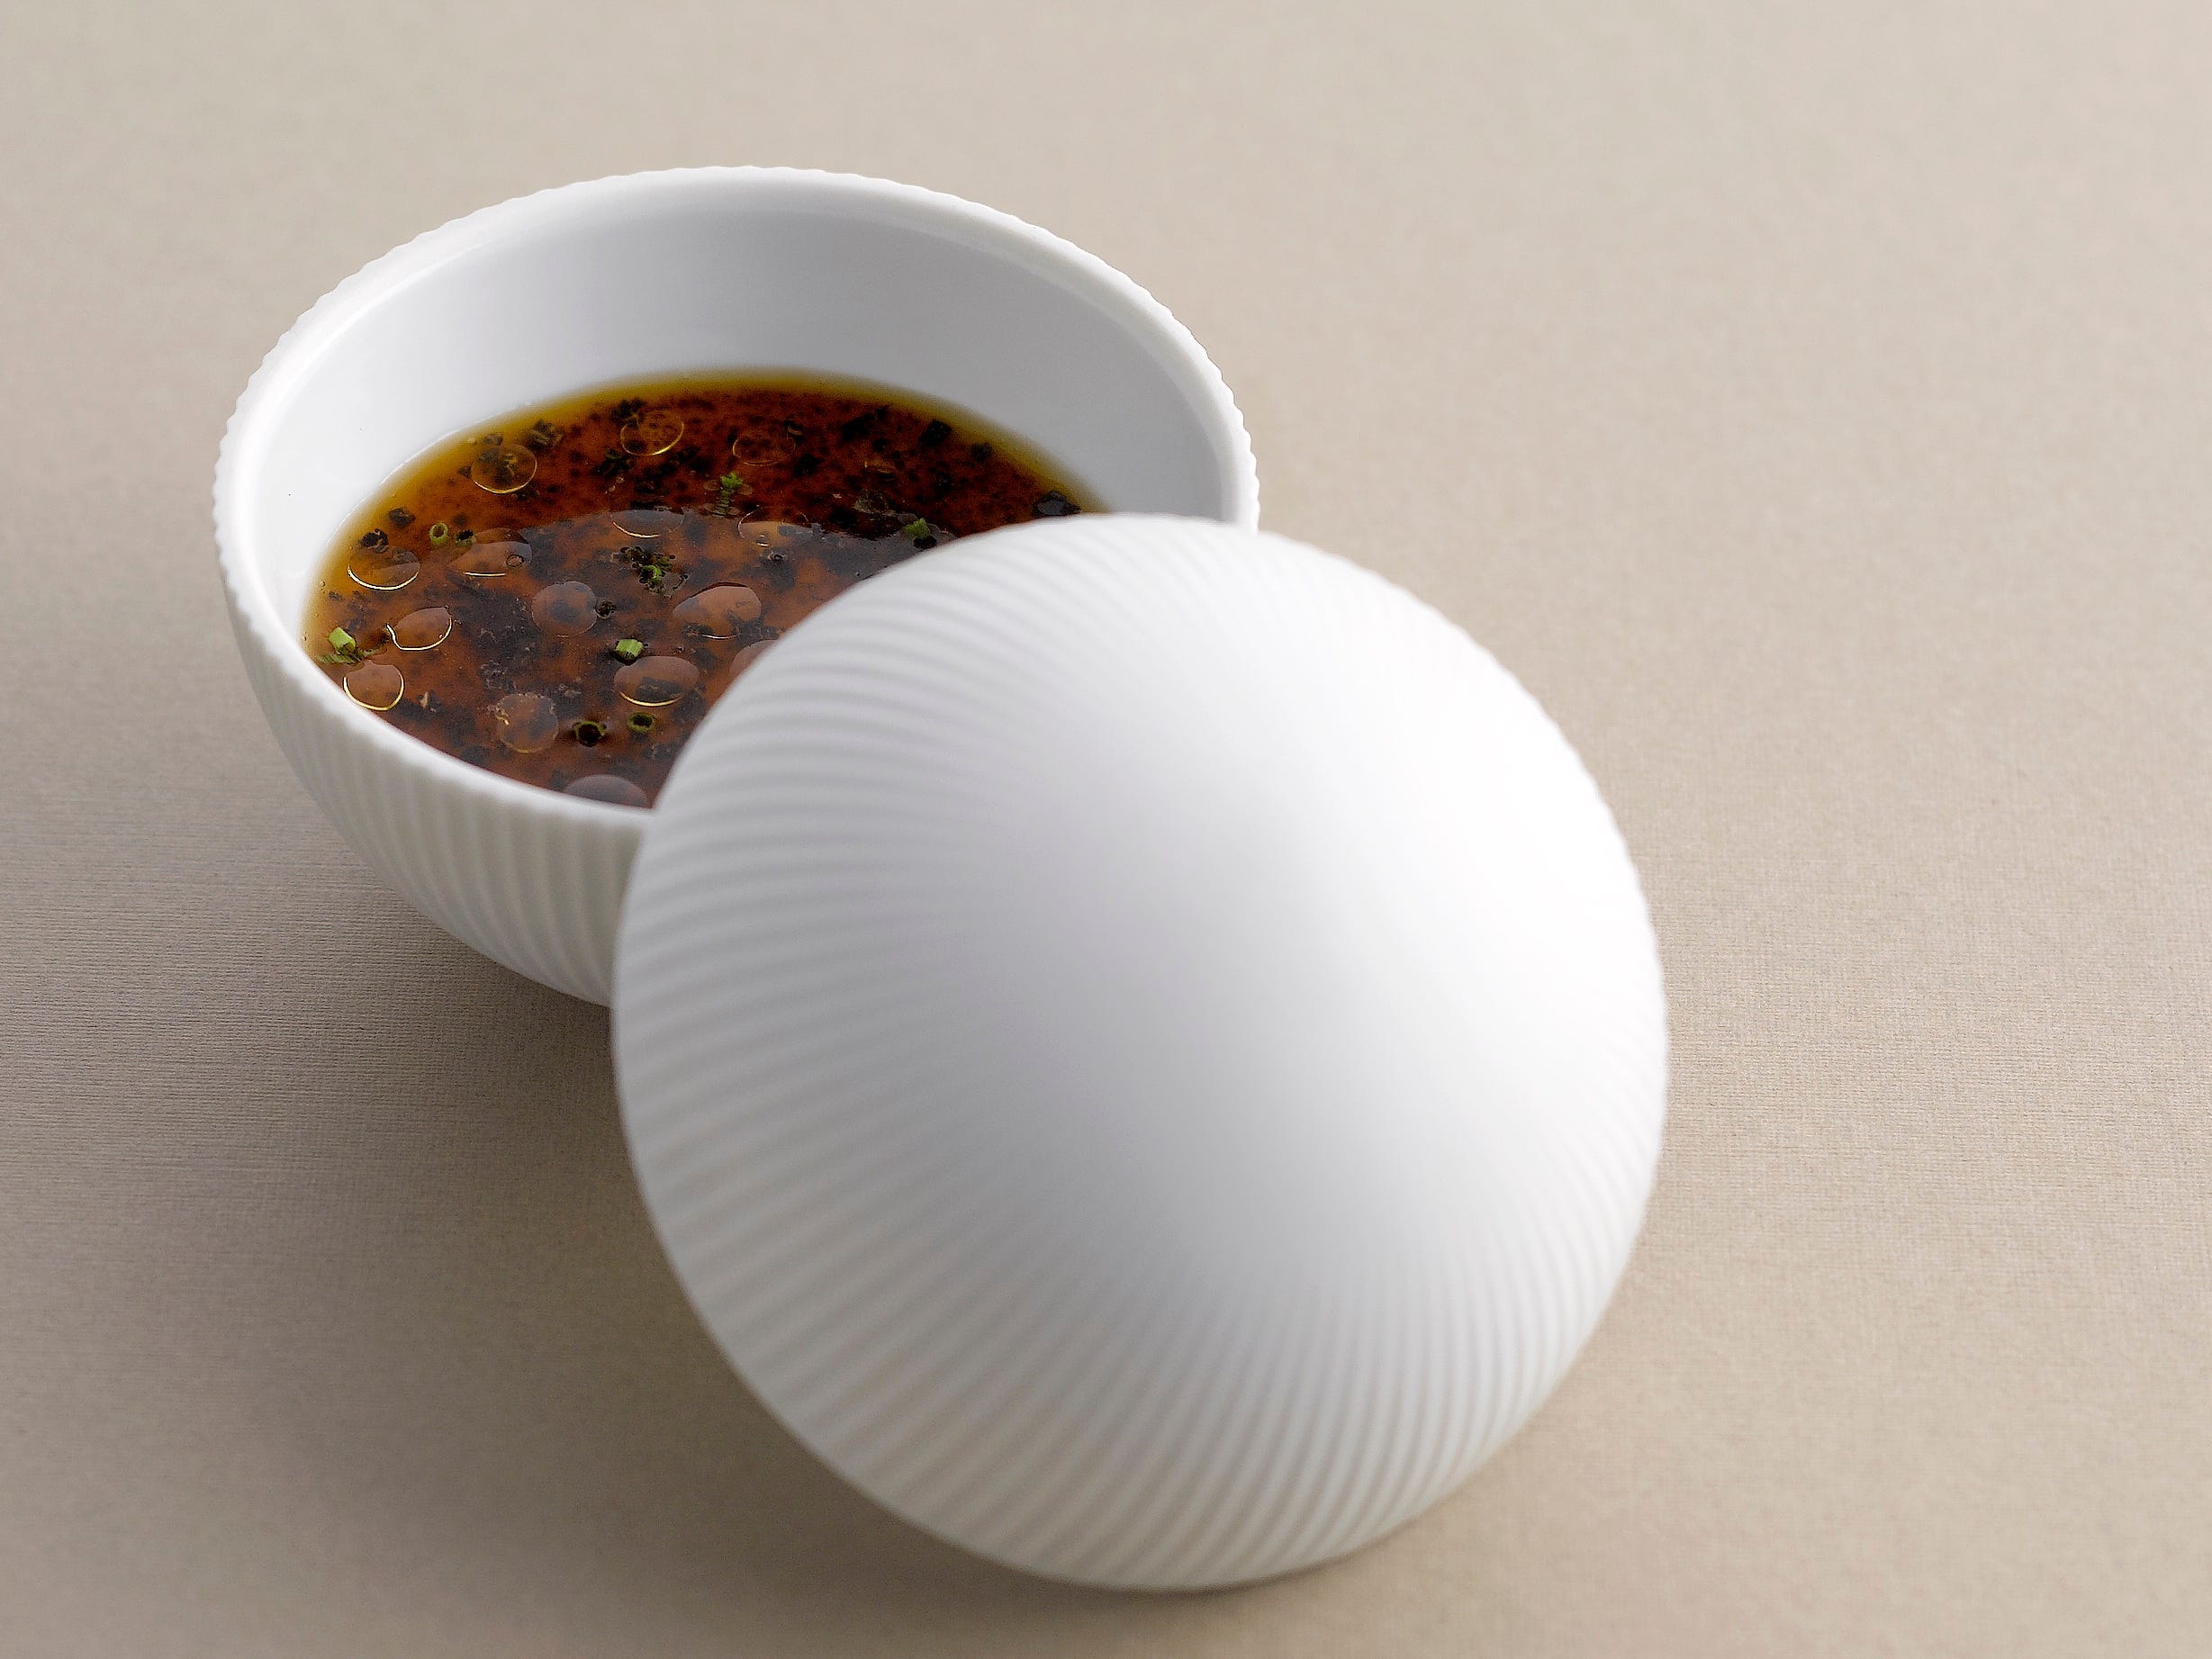 Chef Andre Chiang's classic "memory" dish is served in a white bowl with a white lid.